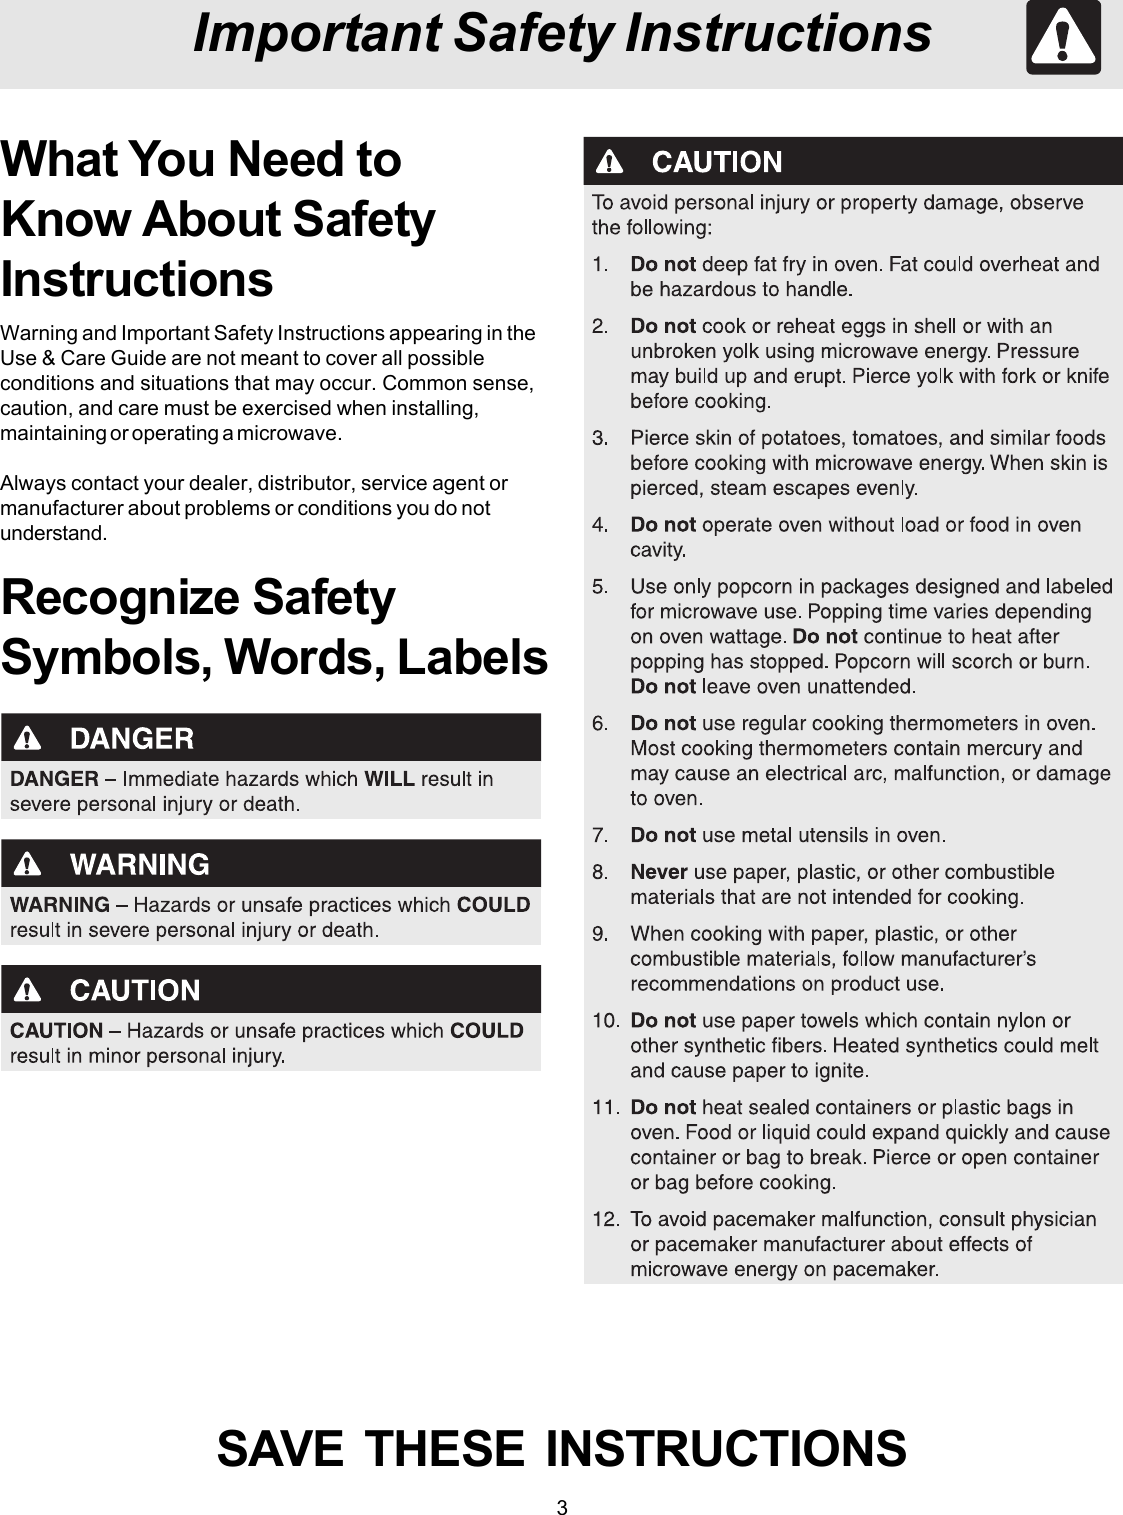 3Important Safety InstructionsWhat You Need toKnow About SafetyInstructionsWarning and Important Safety Instructions appearing in theUse &amp; Care Guide are not meant to cover all possibleconditions and situations that may occur. Common sense,caution, and care must be exercised when installing,maintaining or operating a microwave.Always contact your dealer, distributor, service agent ormanufacturer about problems or conditions you do notunderstand.Recognize SafetySymbols, Words, LabelsSAVE  THESE  INSTRUCTIONS